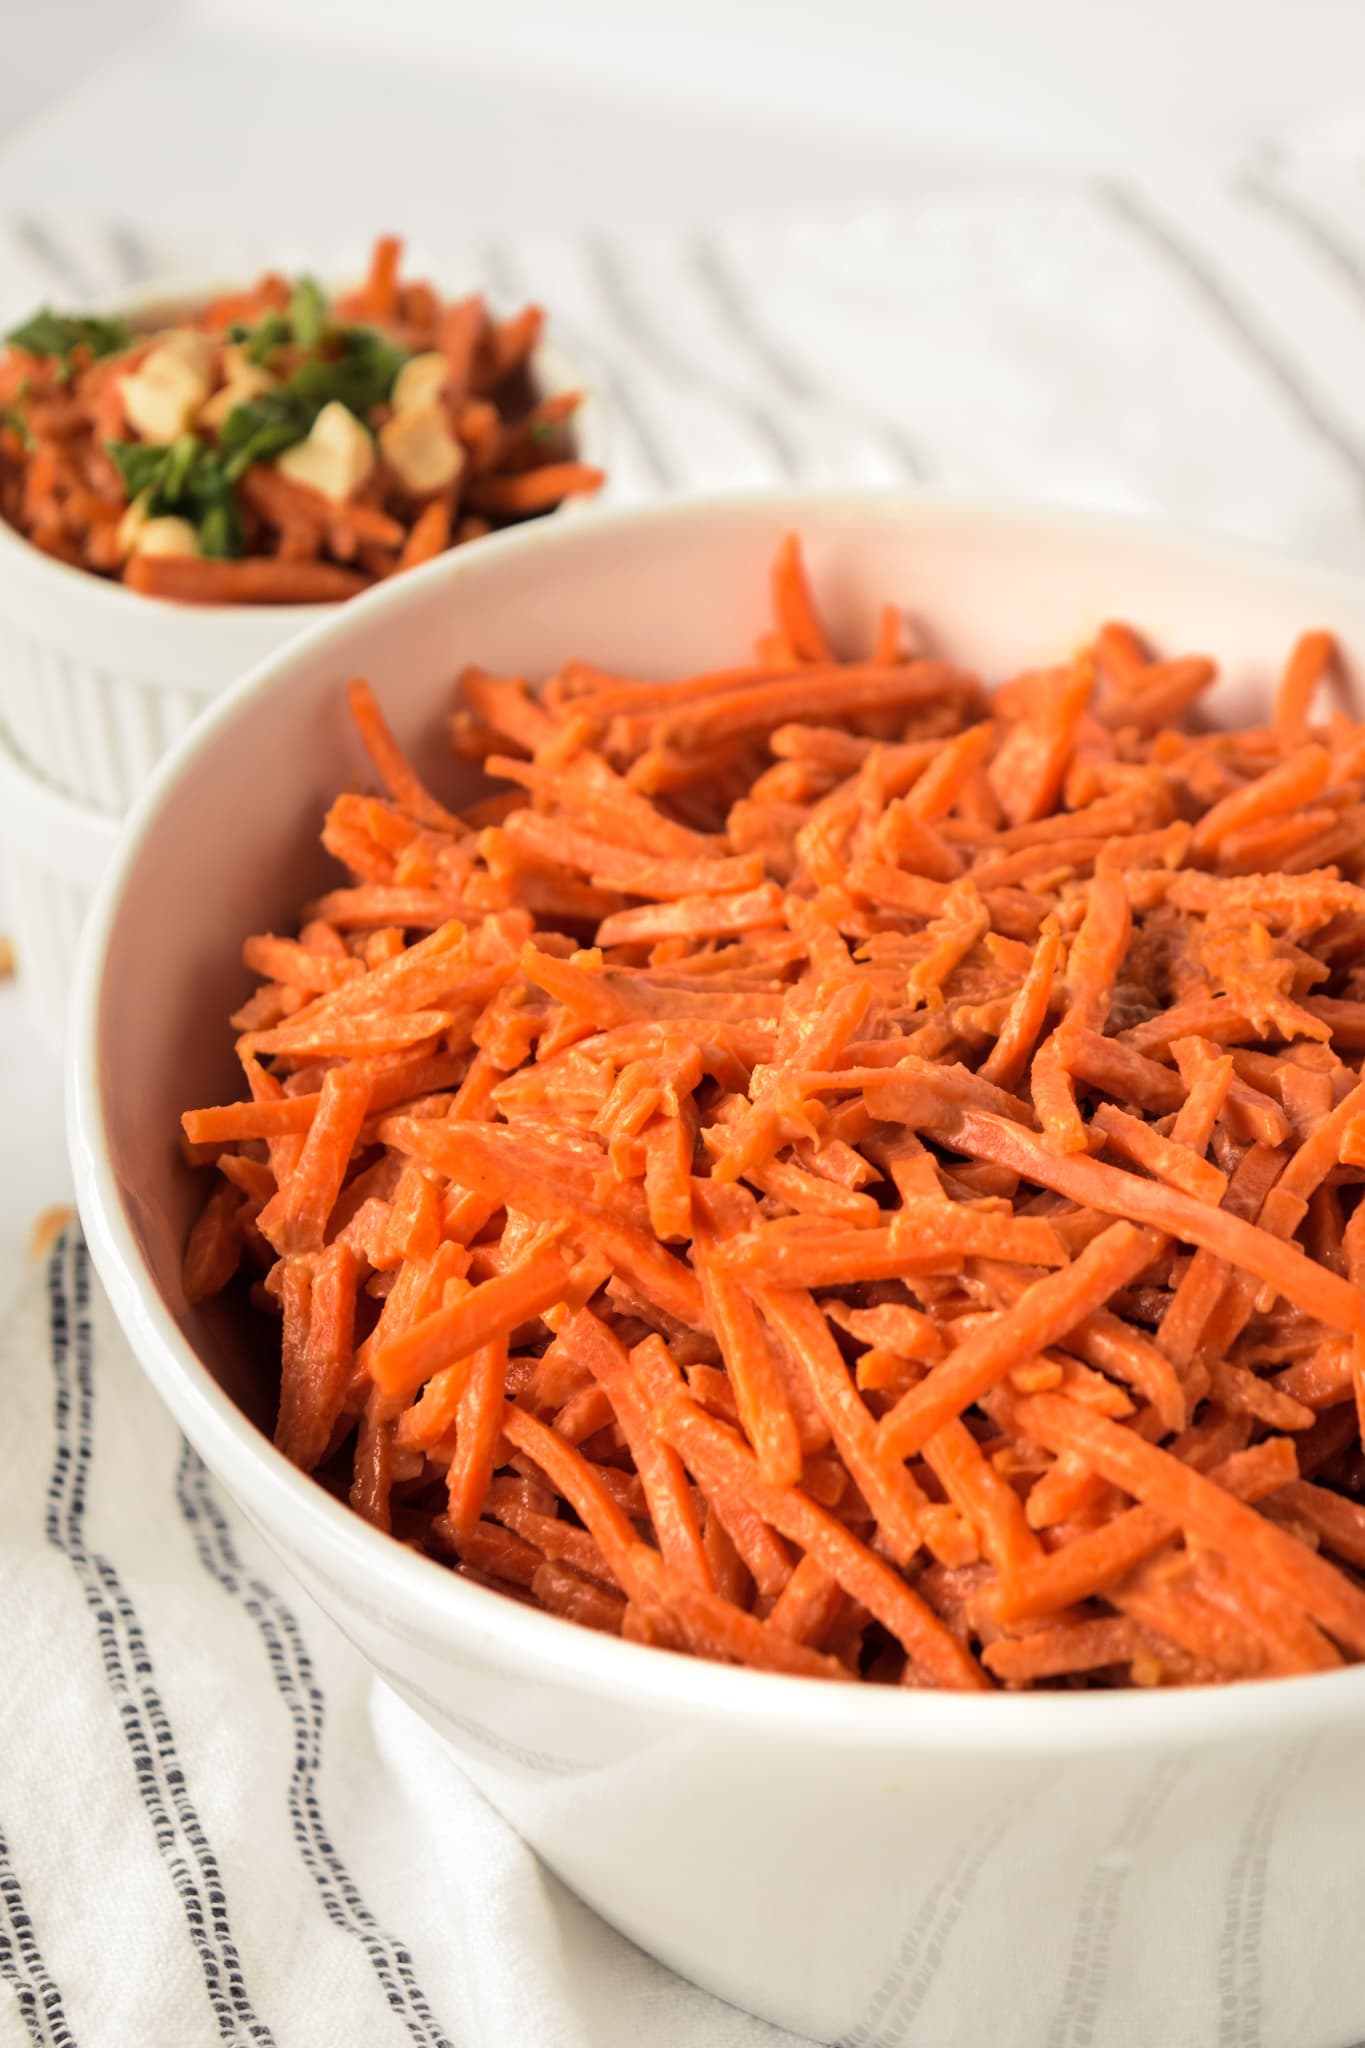 Shredded Carrot Salad with Large White Dish